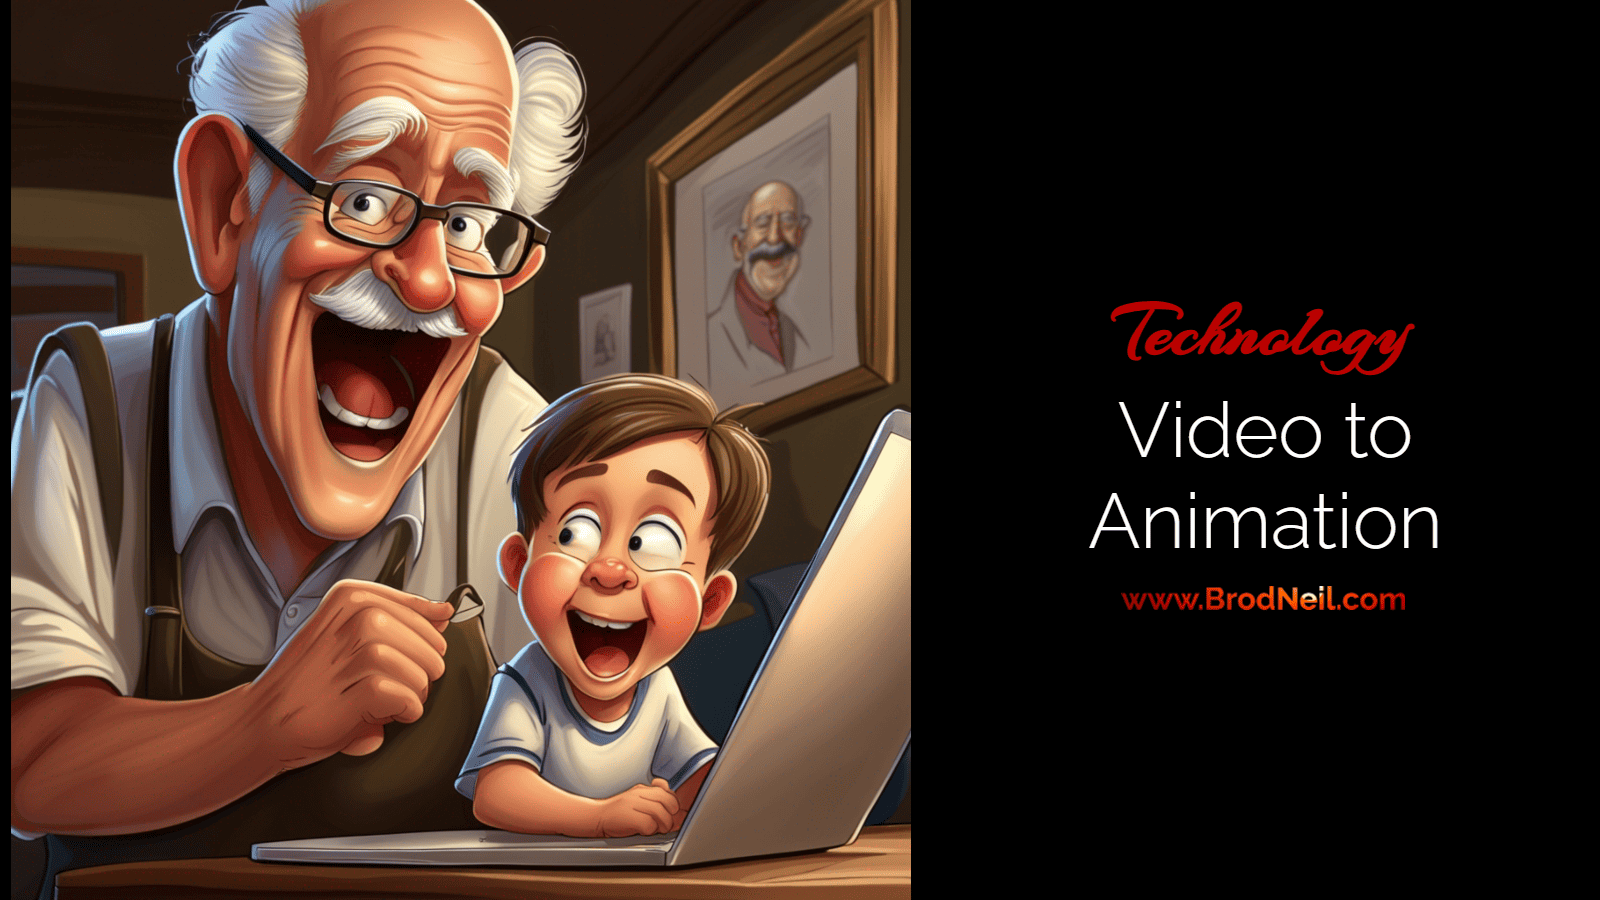 This is a featured image for the Video to Animation post - grandpa working on laptop with grandson